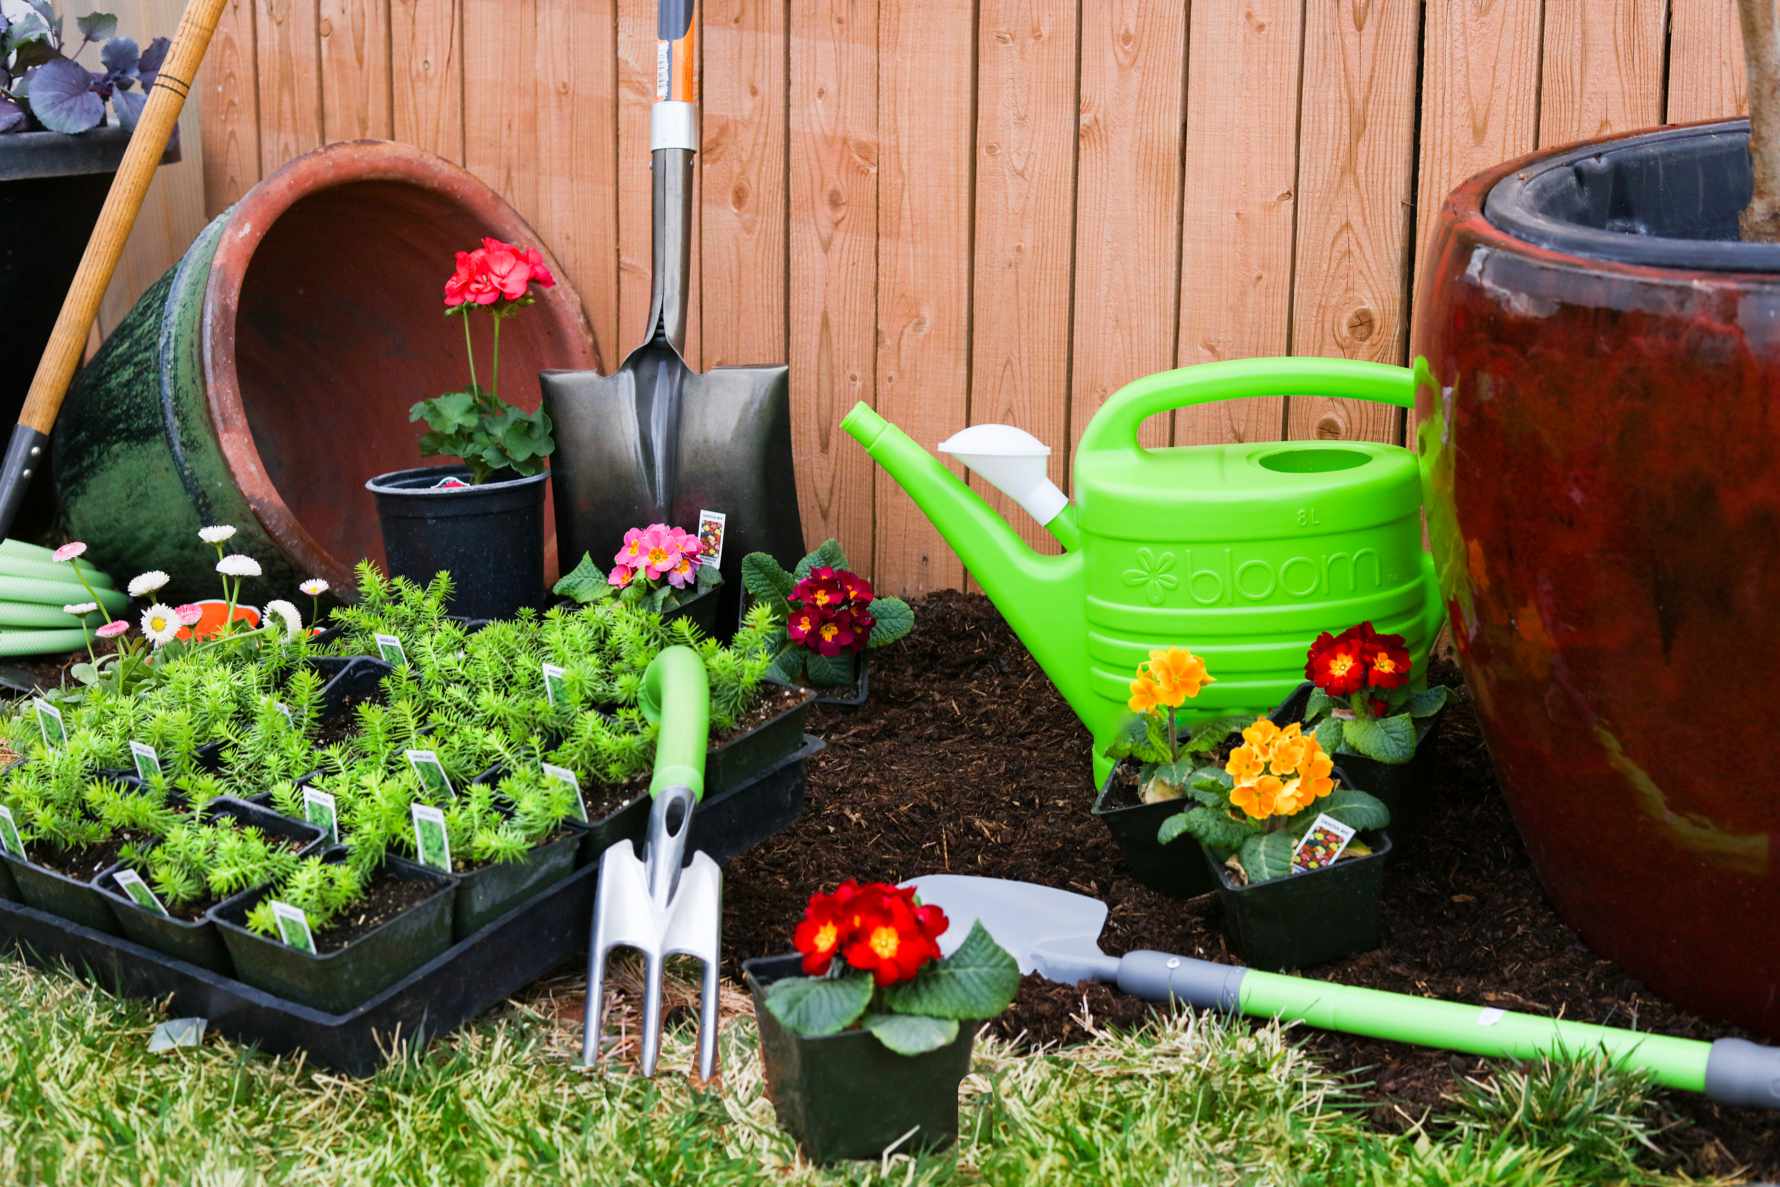 a display of gardening equipment, including a green watering can, shovels, pottery, and multi-colored flowers